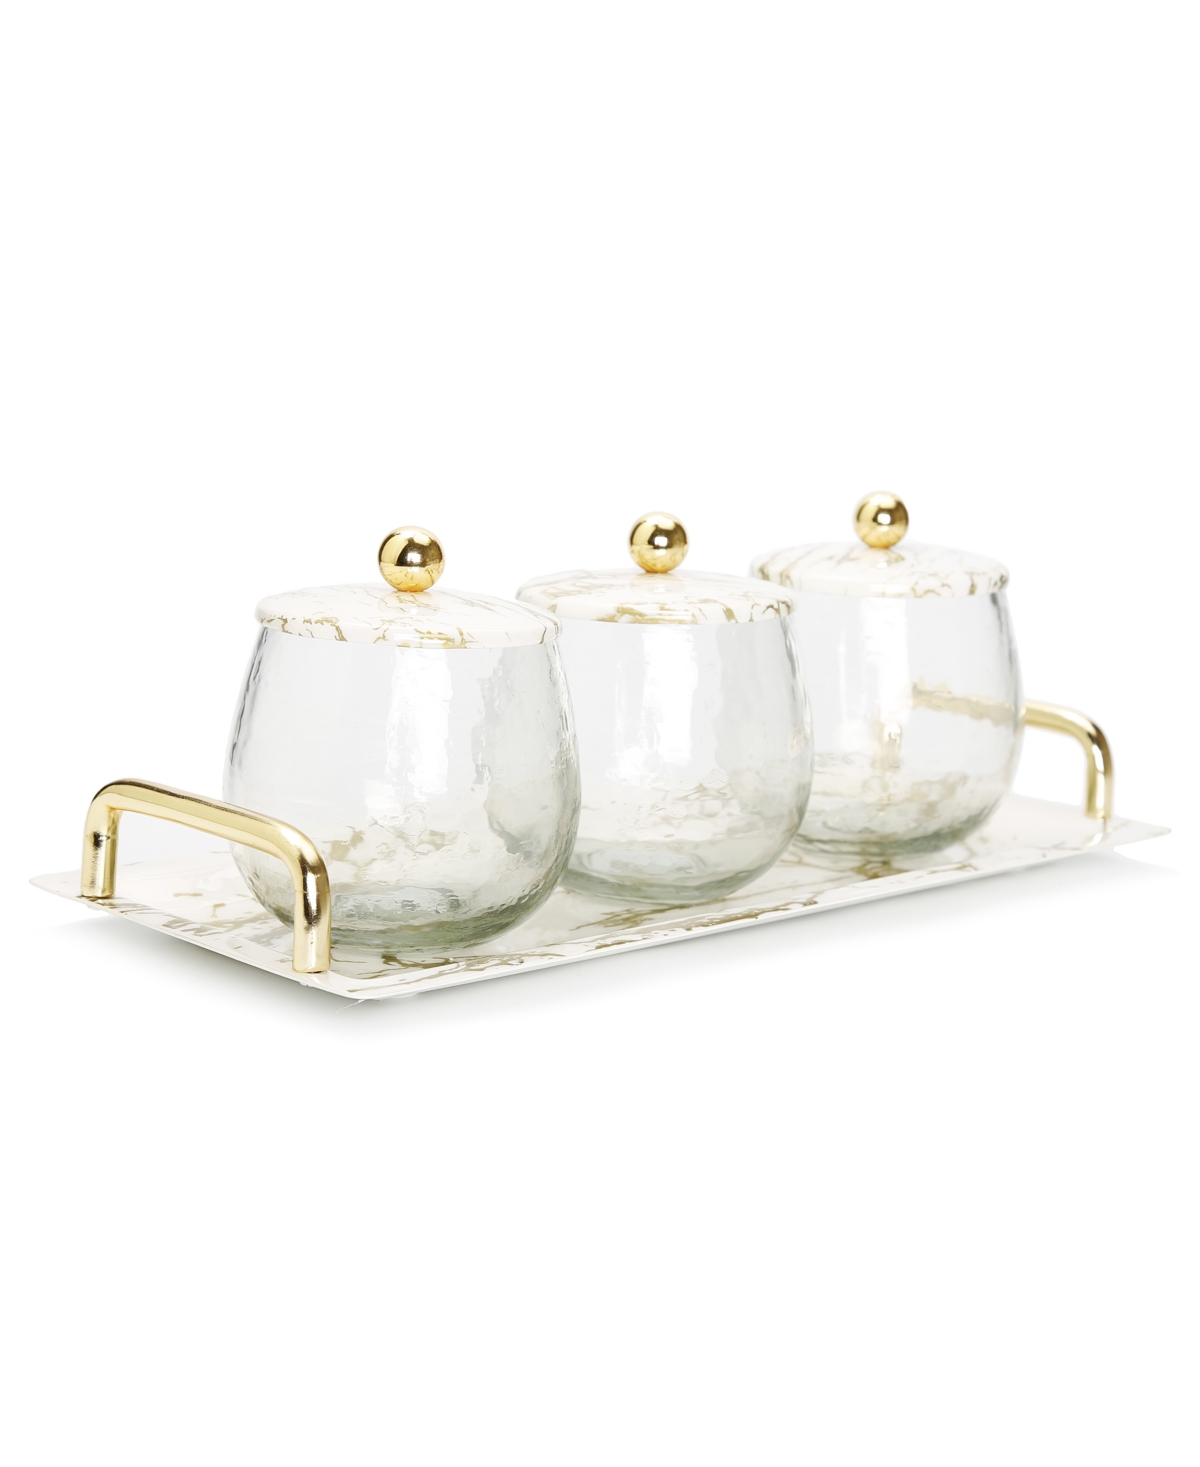 Classic Touch Gold-tone Marble 3 Bowl Serving Dish With Gold-tone Ball Design, Set Of 4 In White